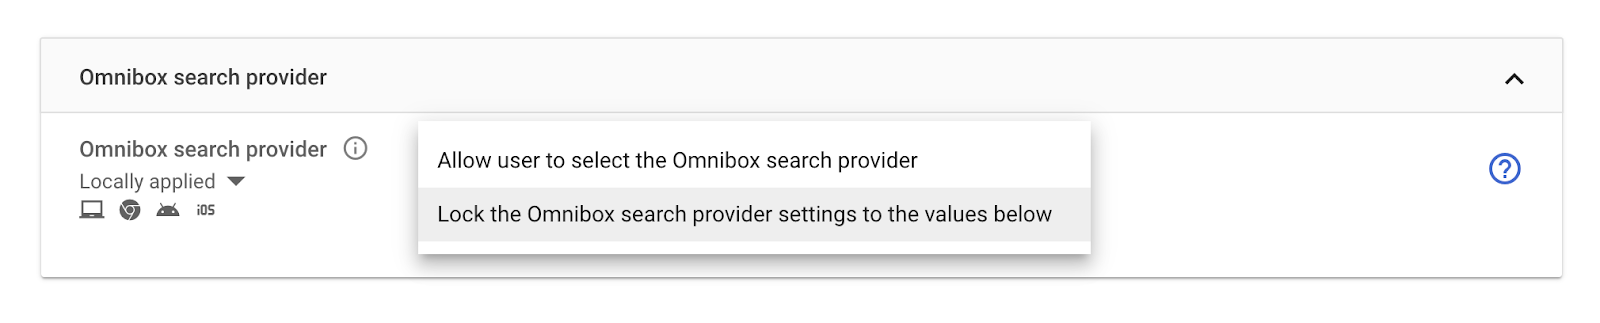 Image showing the omnibox search provider setting lock option